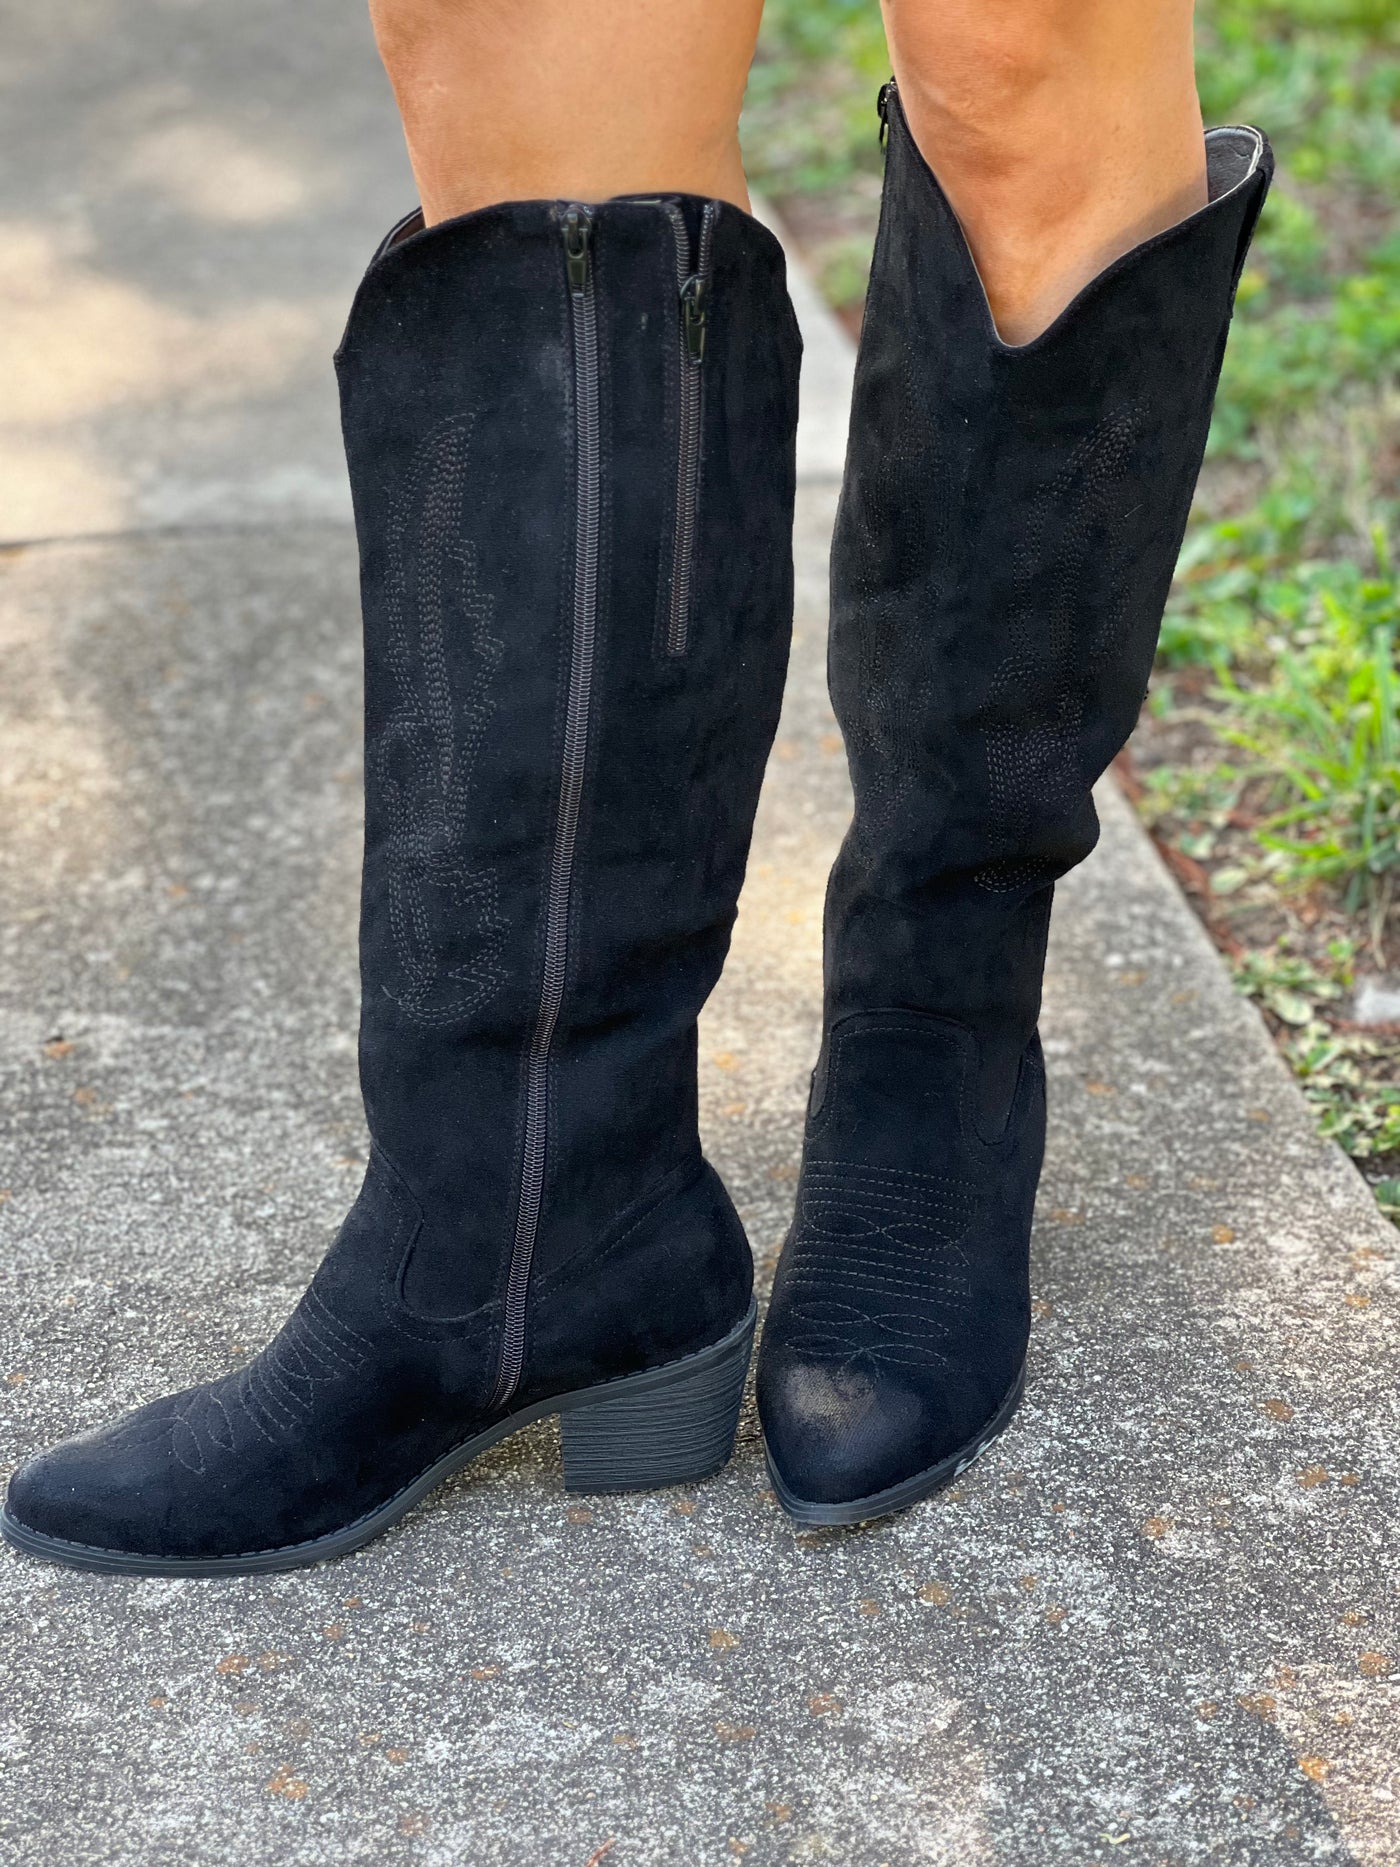 Black Suede Boot